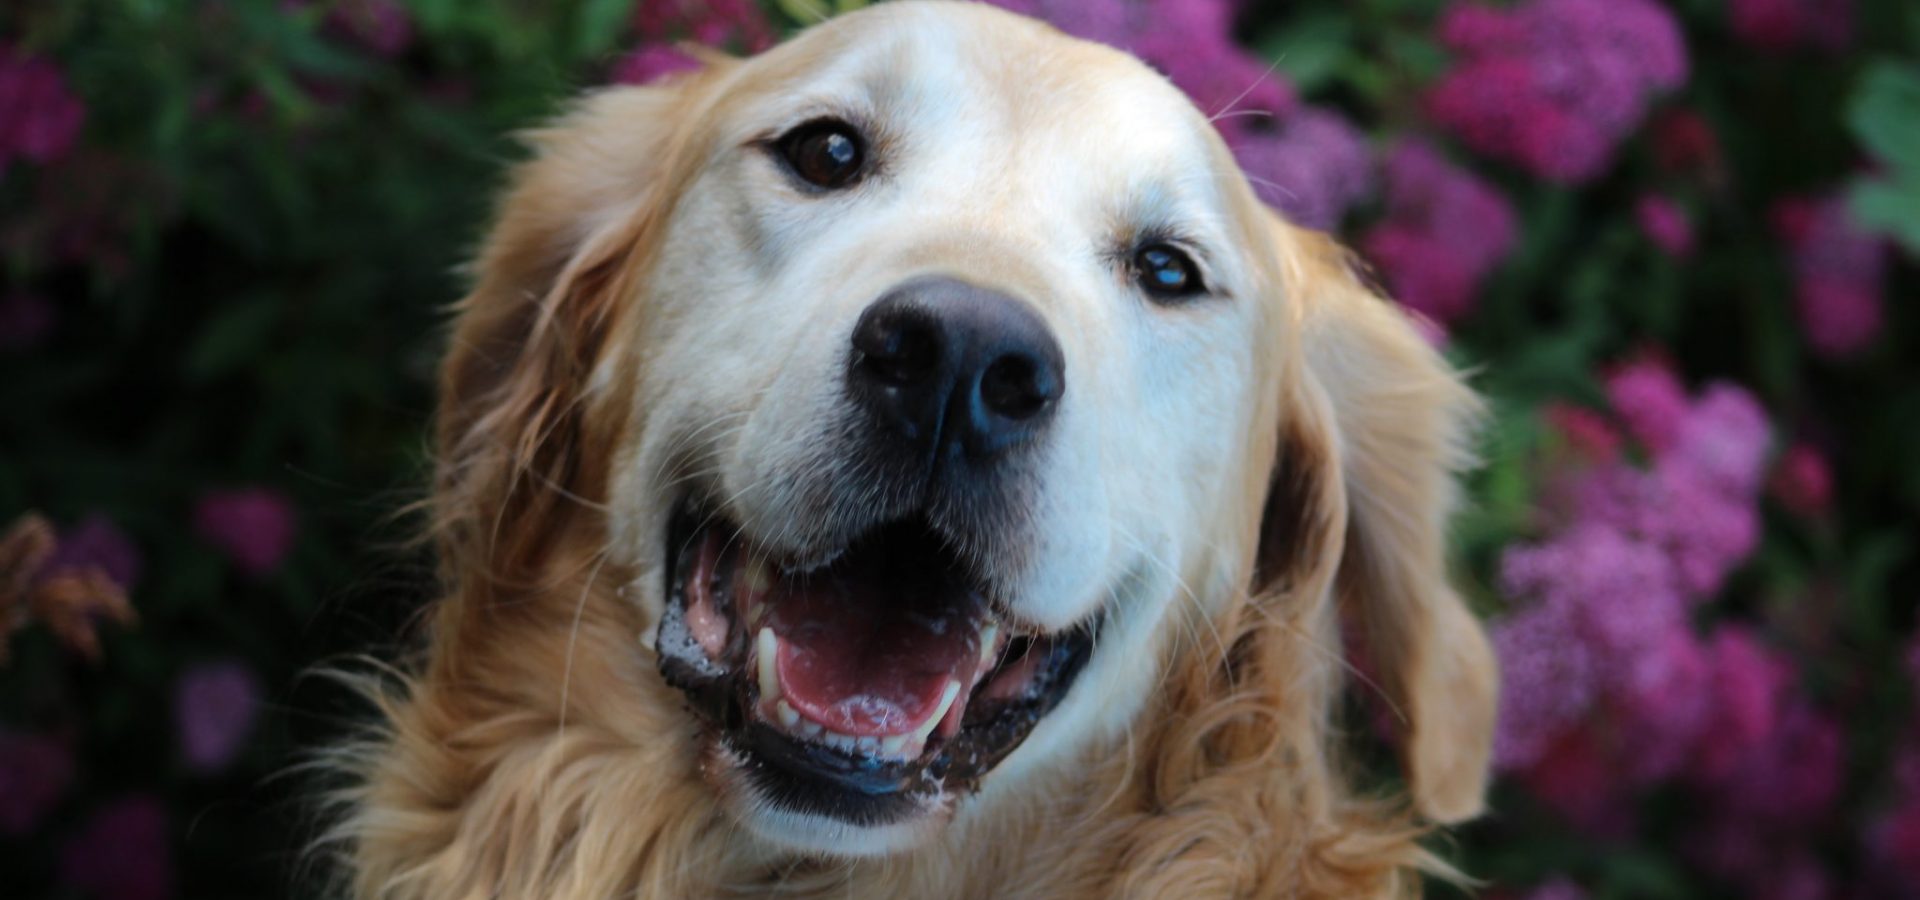 Six interesting facts about Golden retrievers you probably didn’t know!